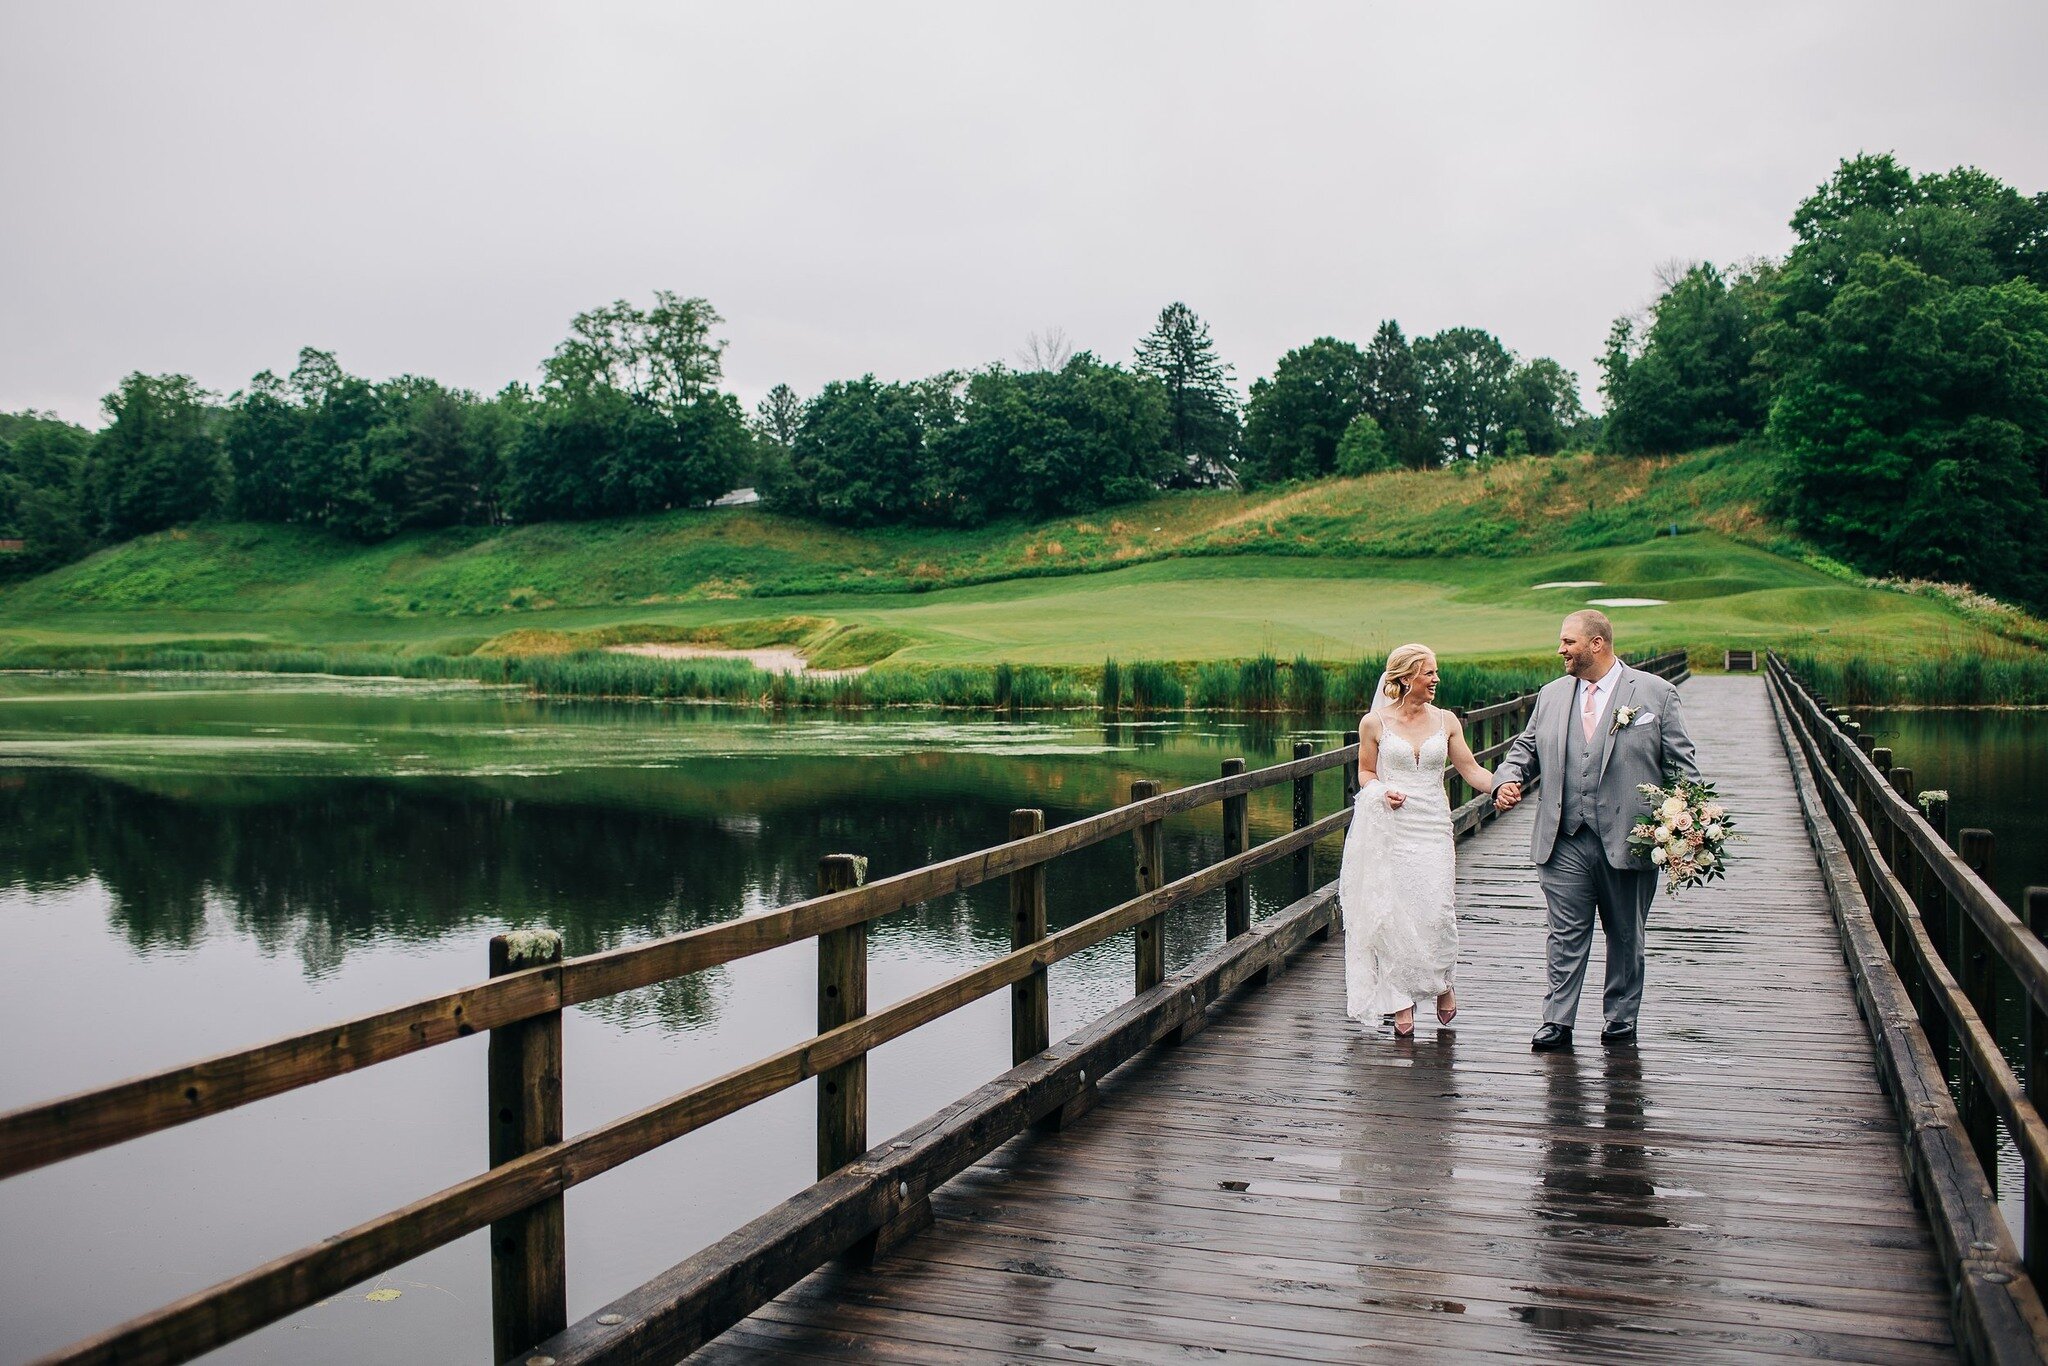 I&rsquo;ve photographed so many weddings at Hollow Brook Golf Club by now, but every single one never ceases to be different and magical in its own way. This venue just seems to call in the most endearing souls, surrounded by the best people. And thi